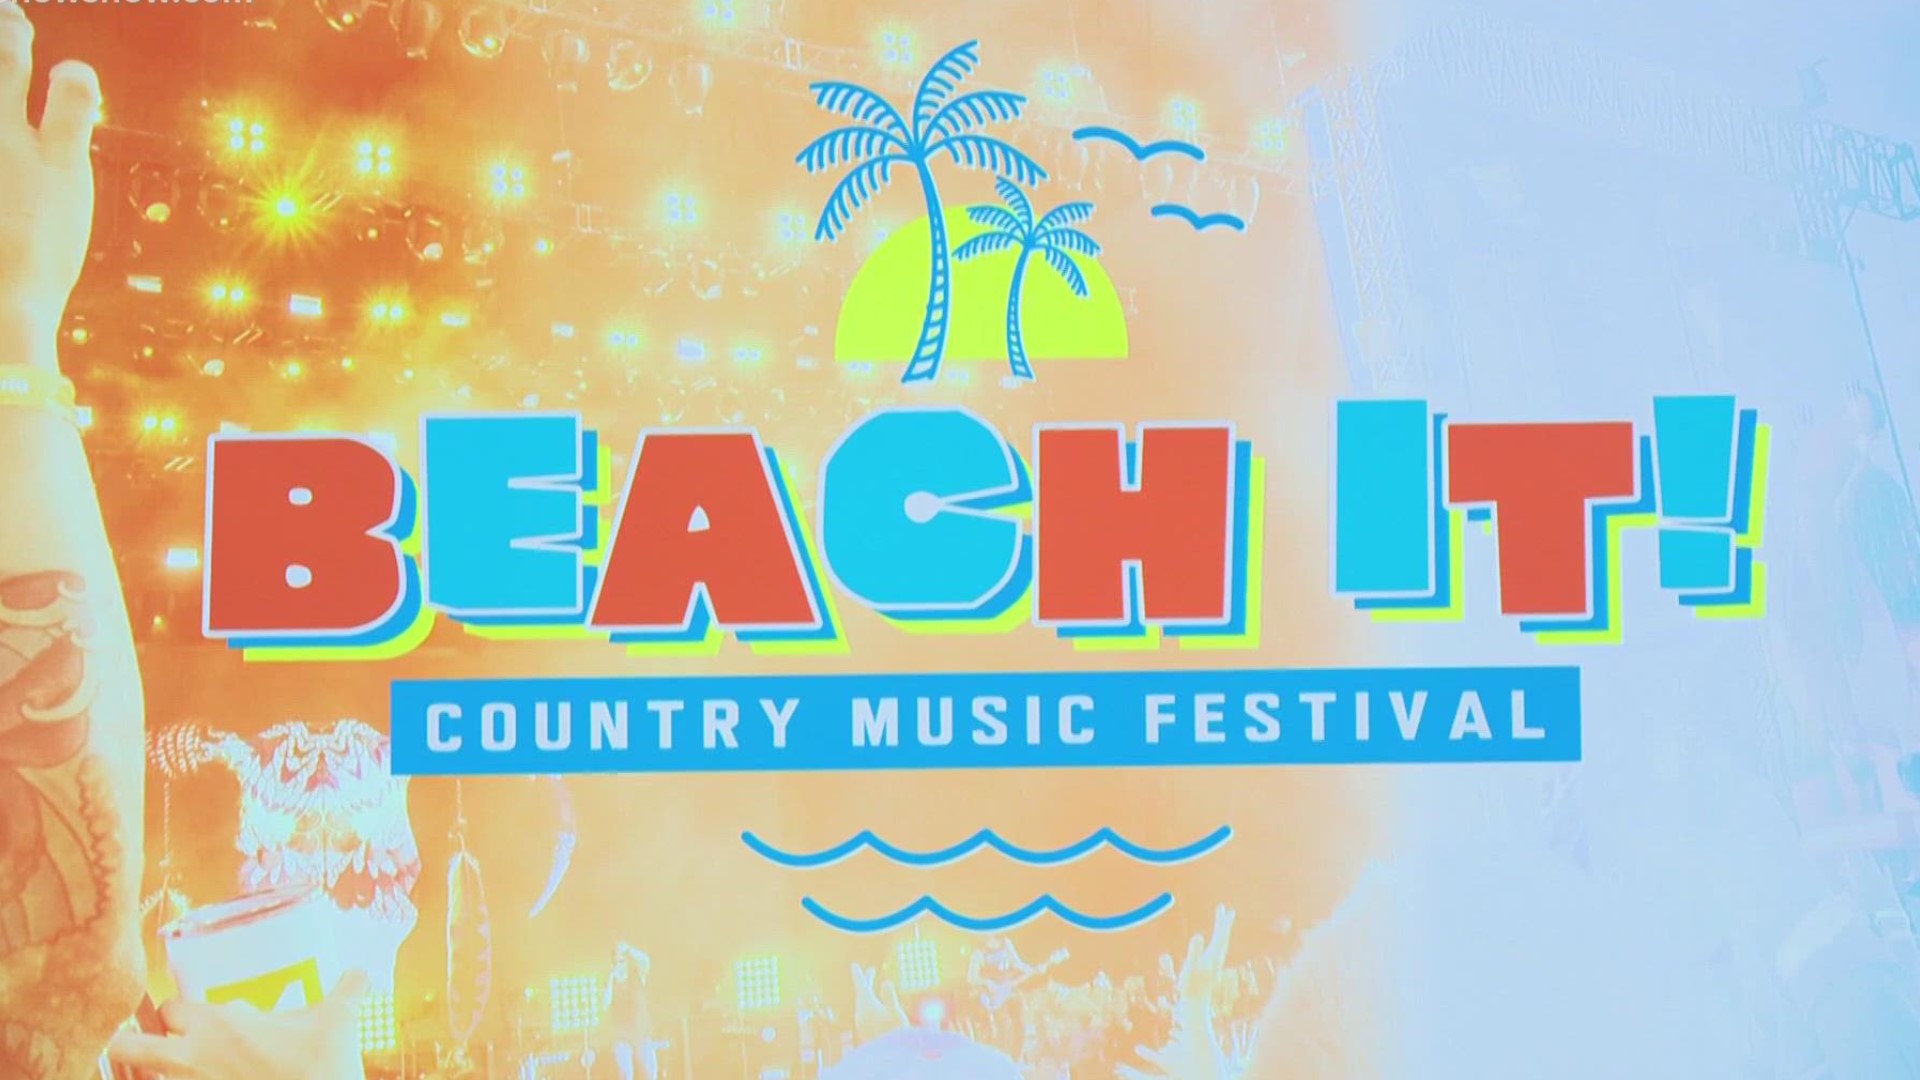 "Beach It!" will host country music artists from across the country from June 23 through 25 at the Virginia Beach Oceanfront.